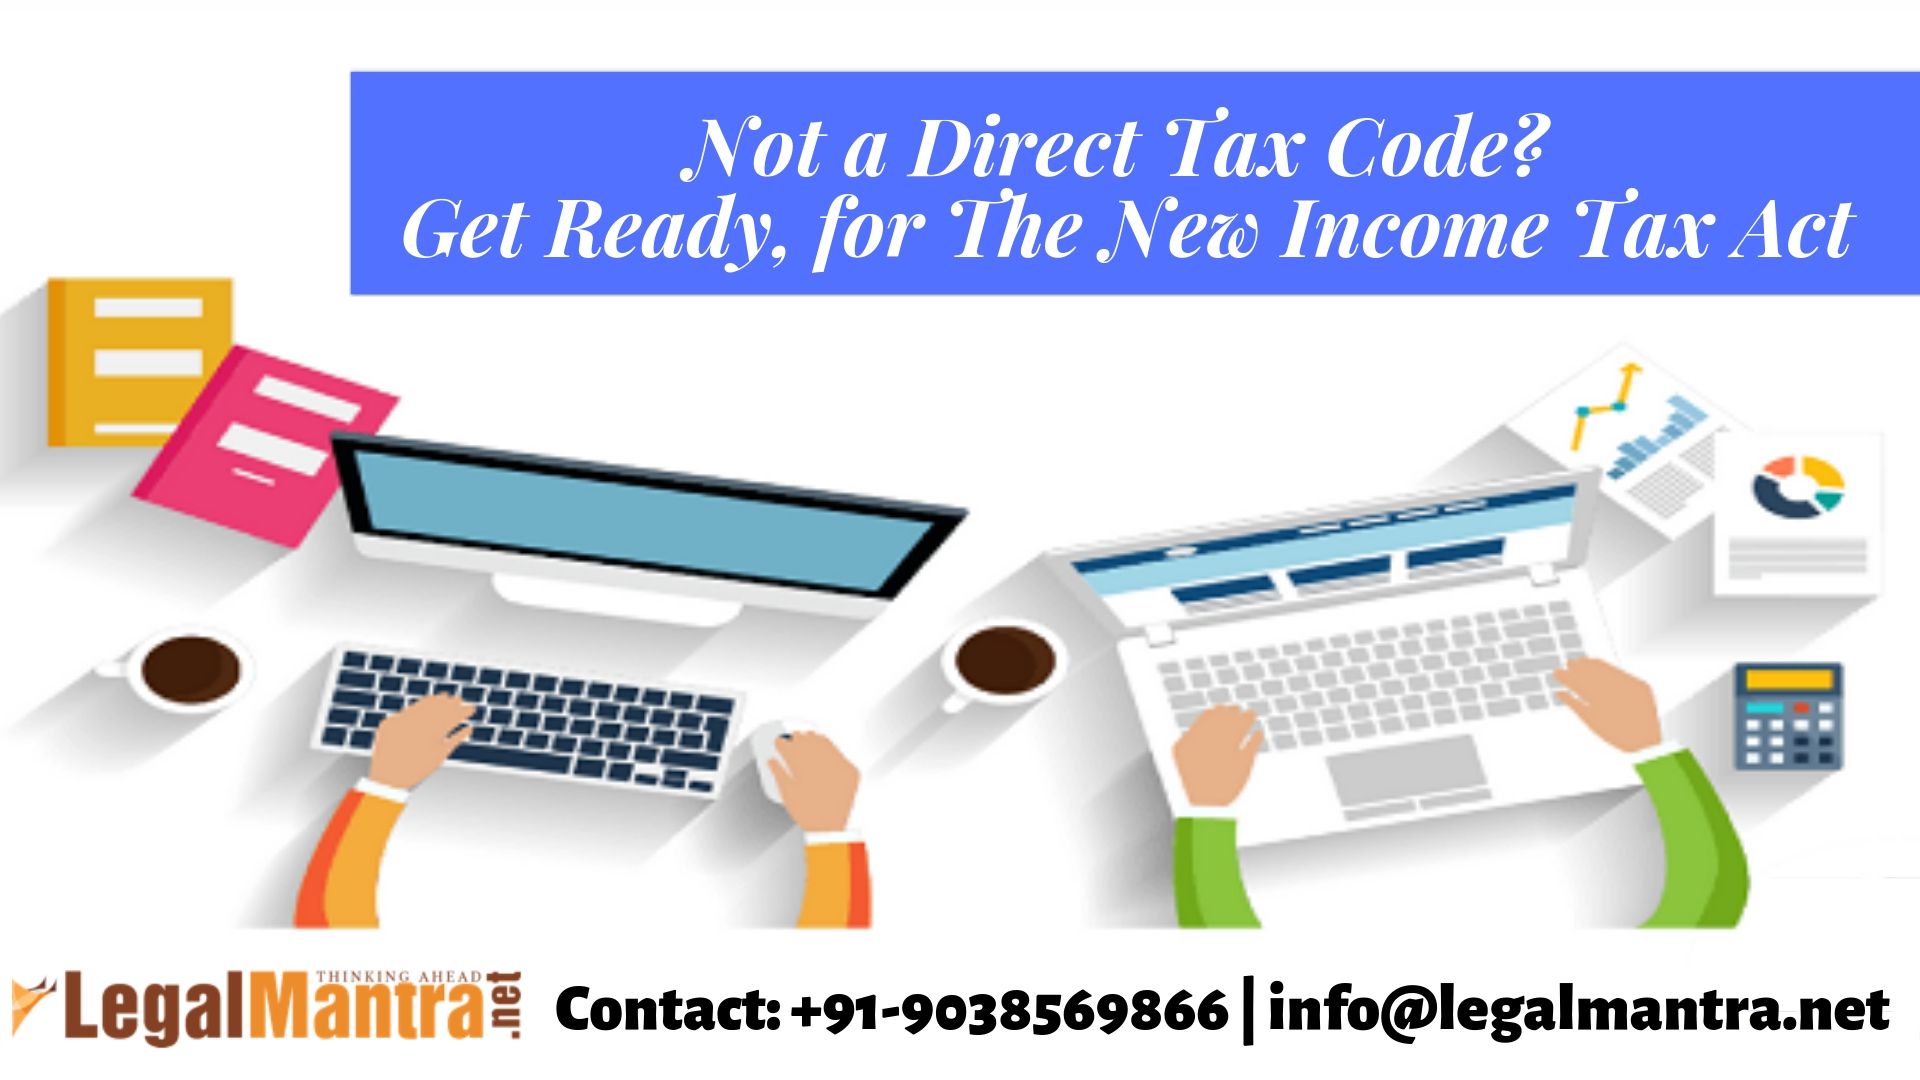 Not a Direct Tax Code? Get Ready, for The New Income Tax Act